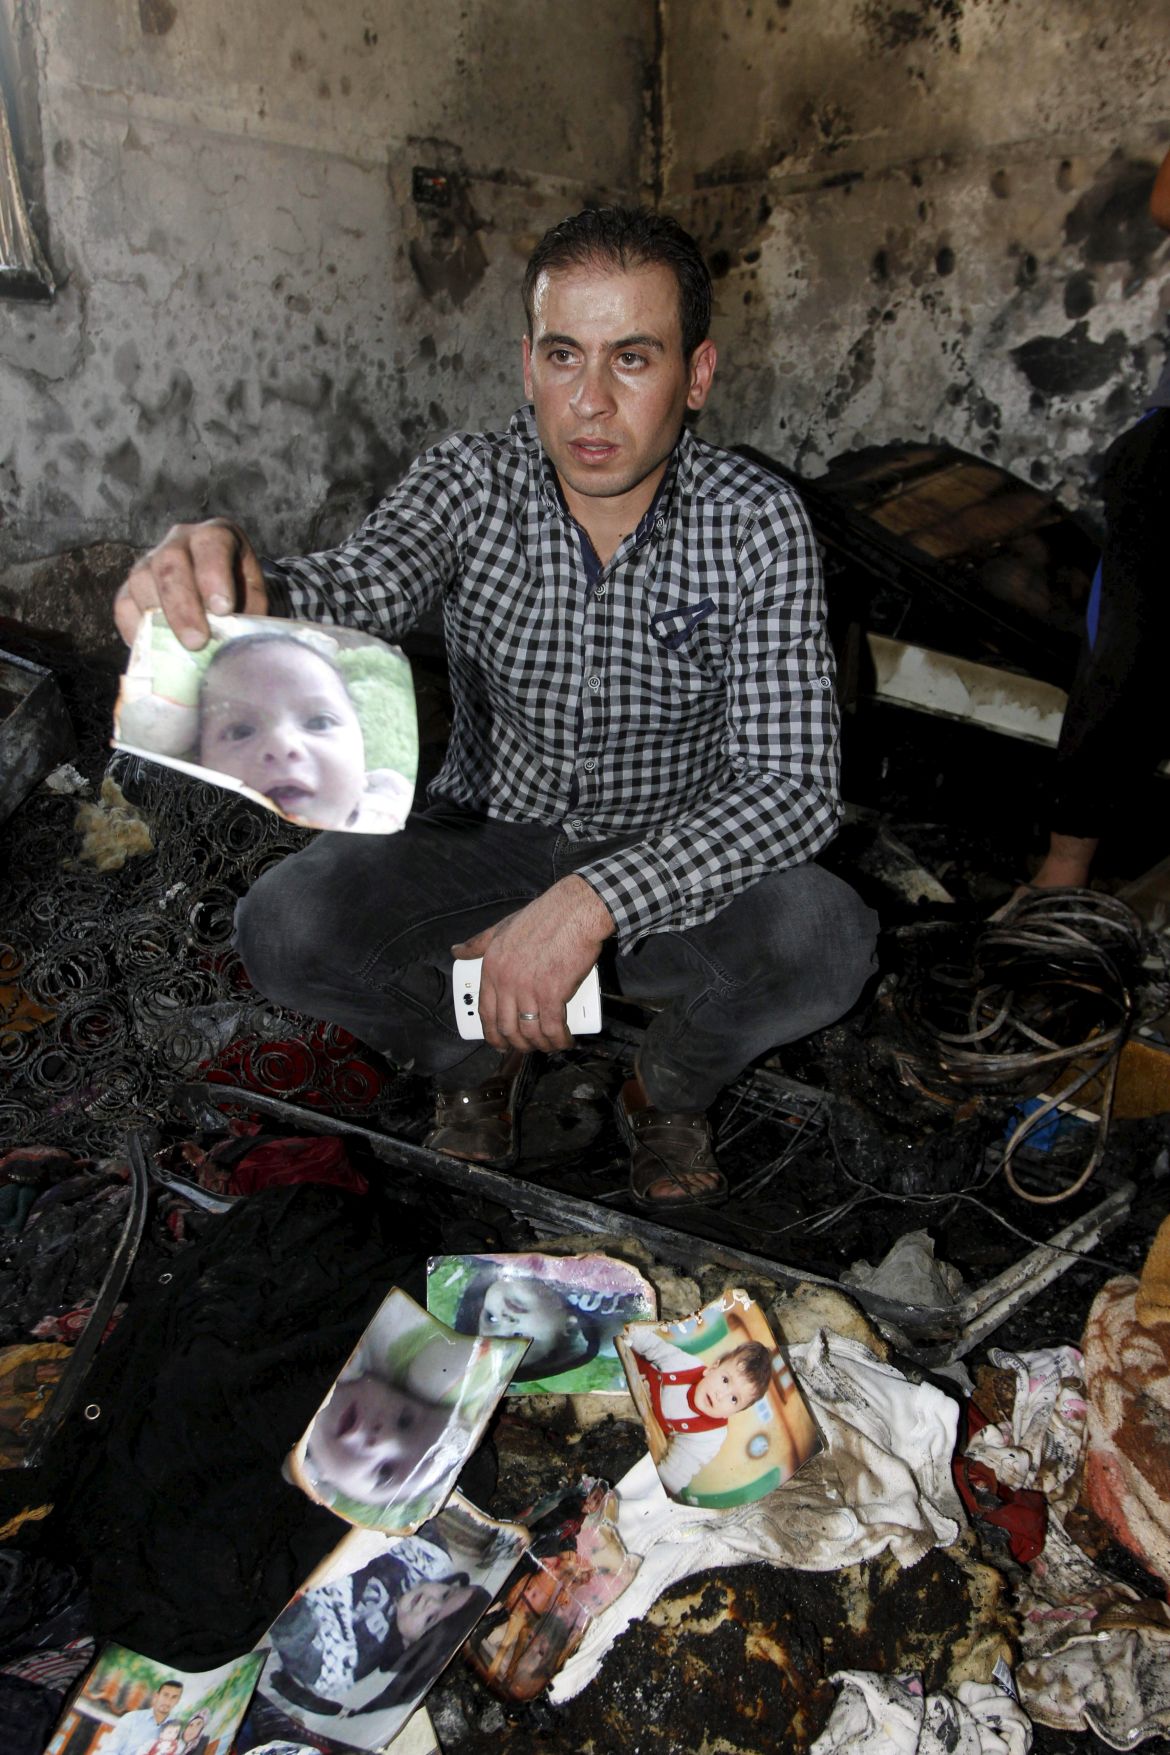 A relative shows a picture of Palestinian baby Ali Dawabsheh, who was killed after his family's house was set on fire in a suspected attack by Jewish extremists, at the burnt house in Duma village near the West Bank city of Nablus